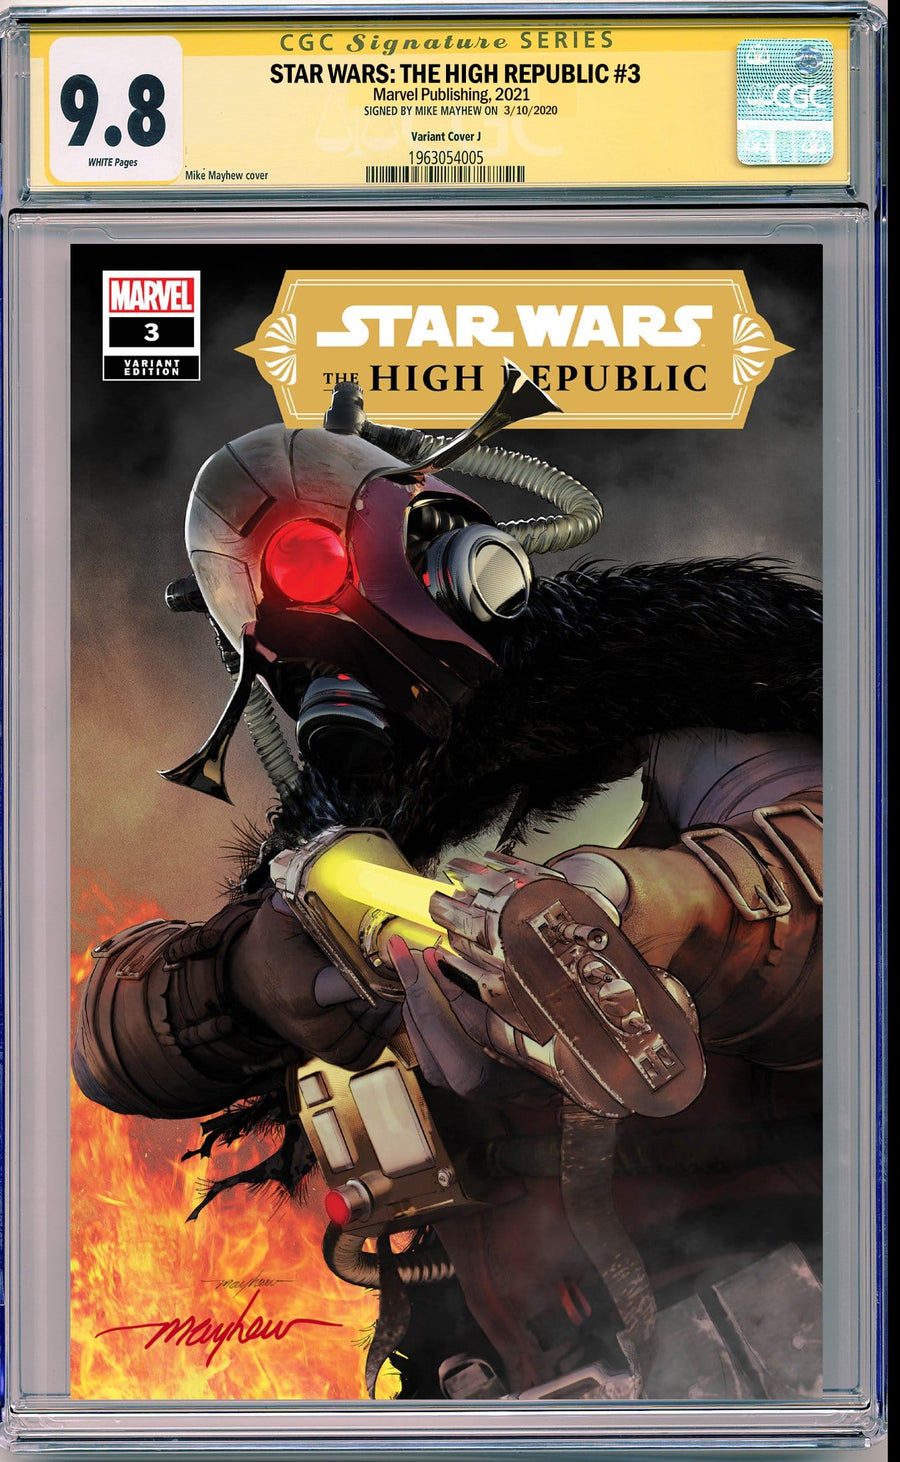 STAR WARS: THE HIGH REPUBLIC #3 MIKE MAYHEW STUDIO EXCLUSIVE VARIANTS CGC SIG SERIES 9.6 AND ABOVE OPTIONS